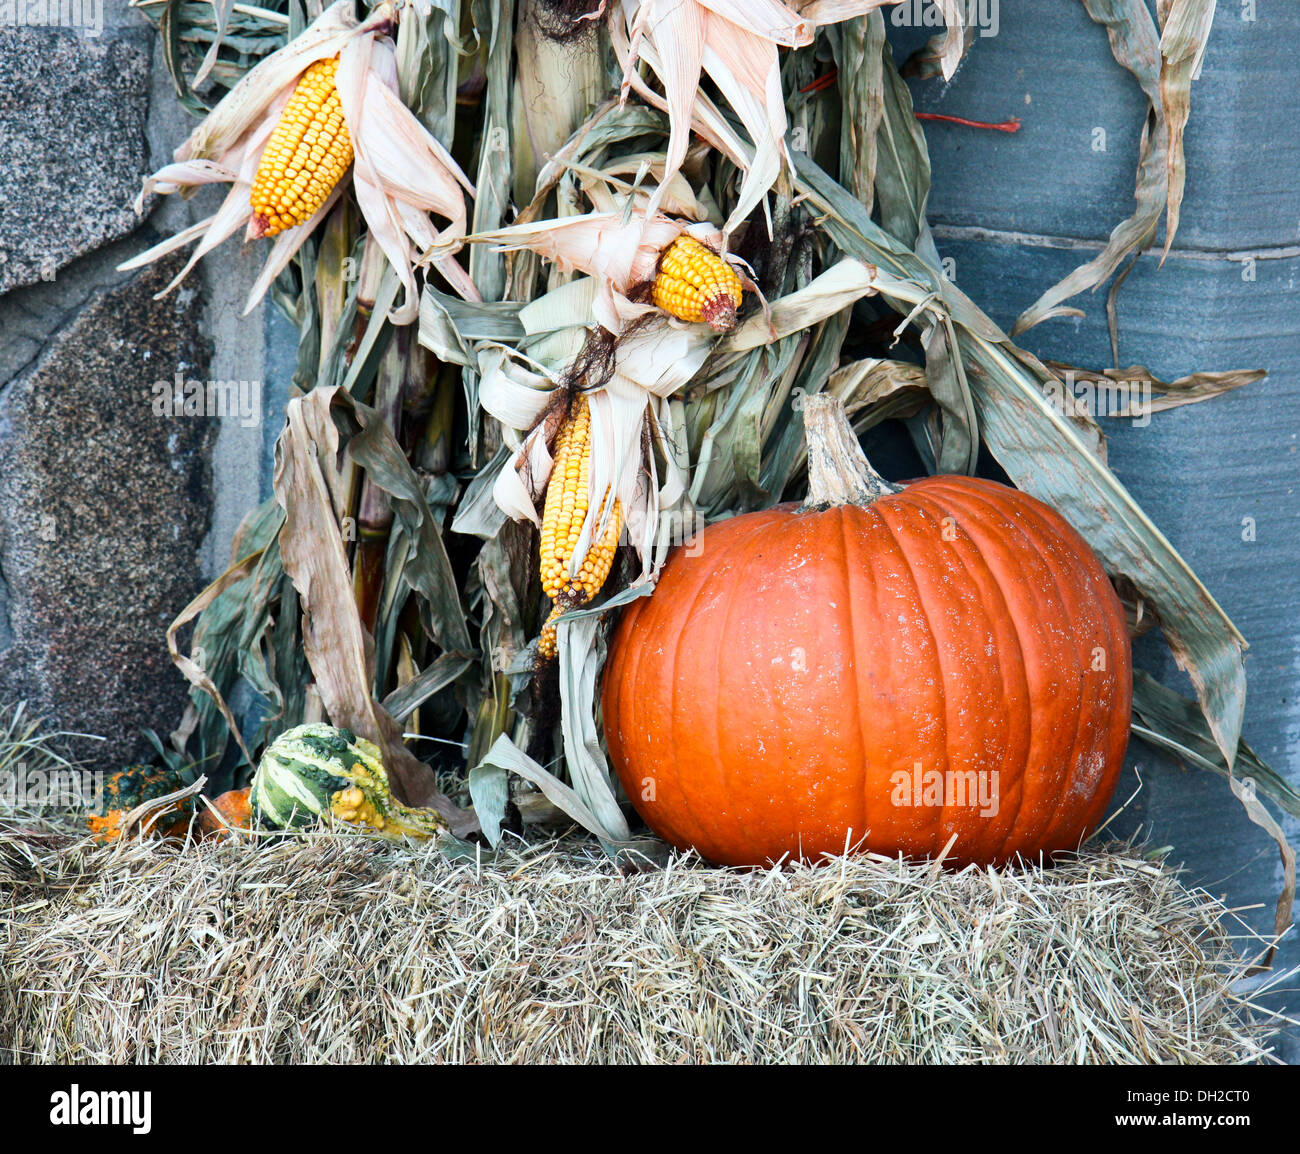 Pumpkin and corn stalks on a bale of hay against a stone wall. Stock Photo